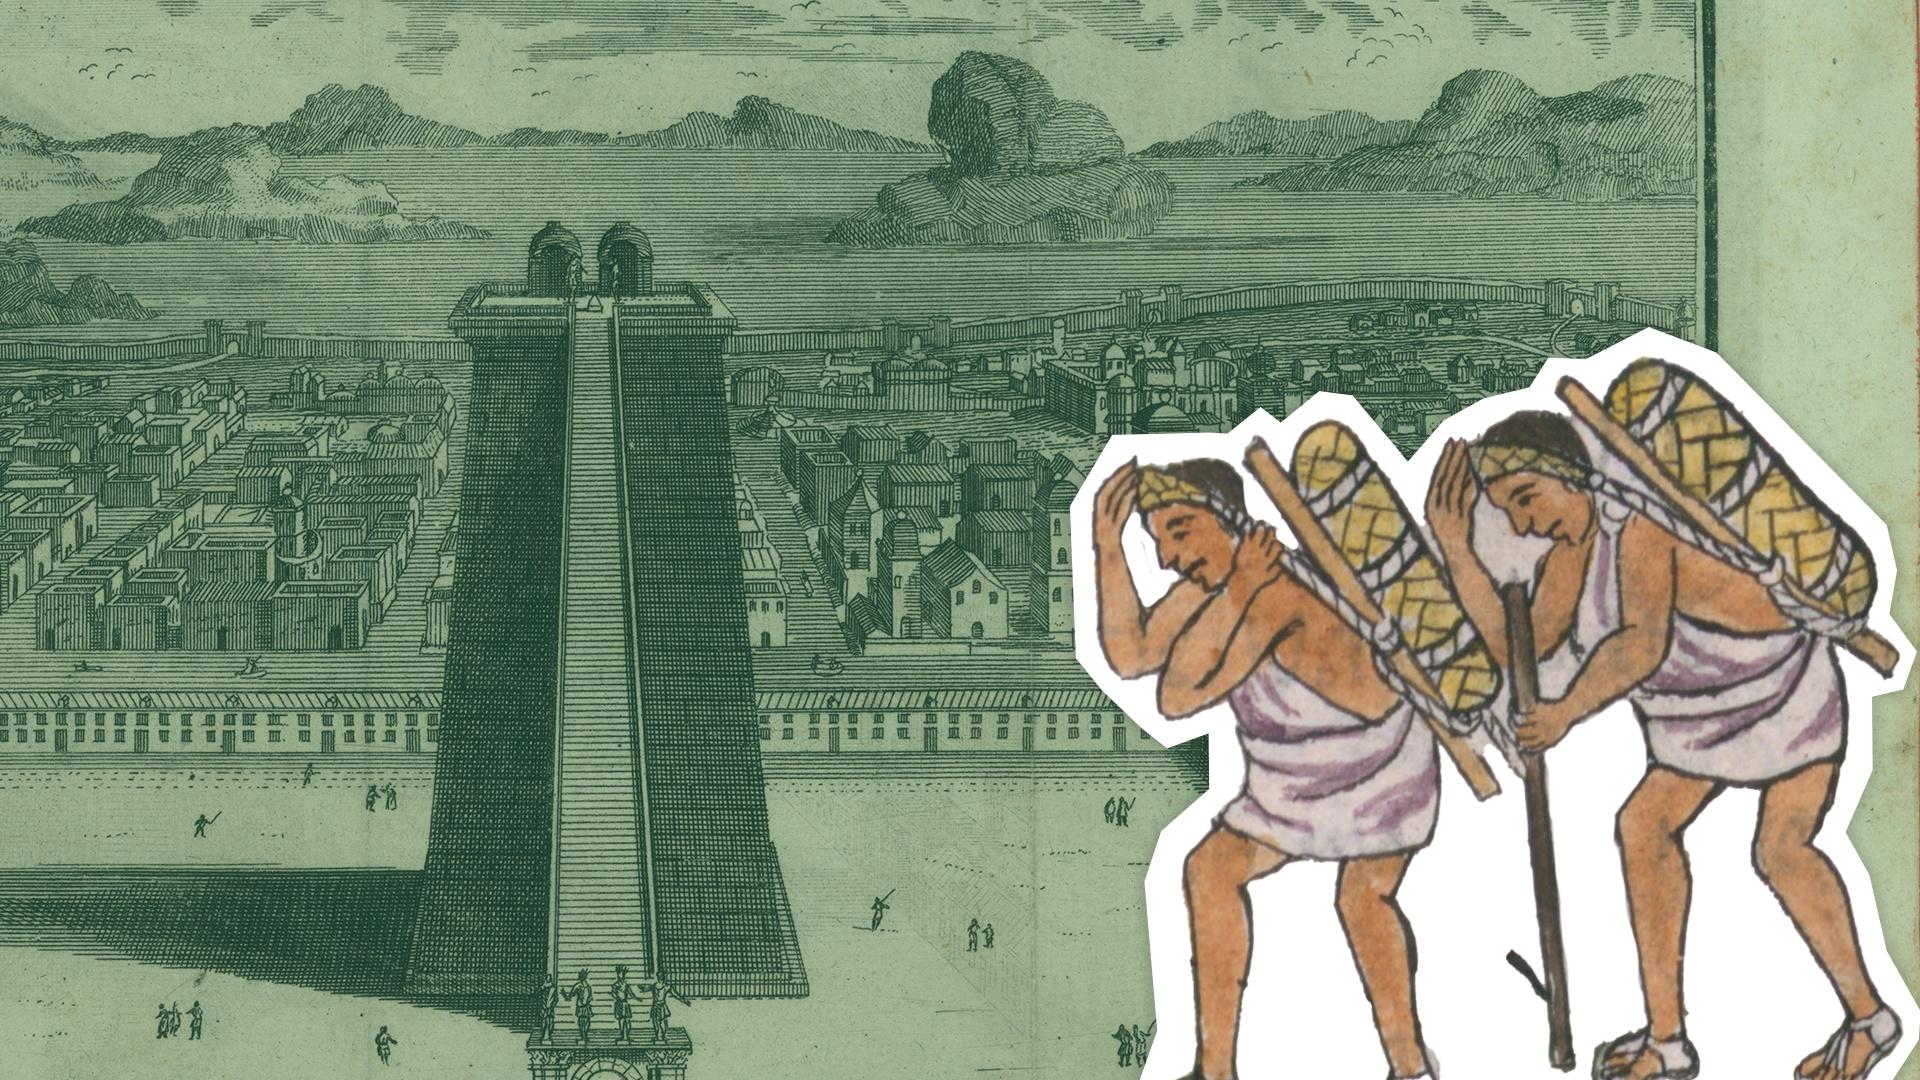 A cutout of drawn aztecs carrying packs on their backs in front of a green monotone image of the ancient city Tenochtitlan. 